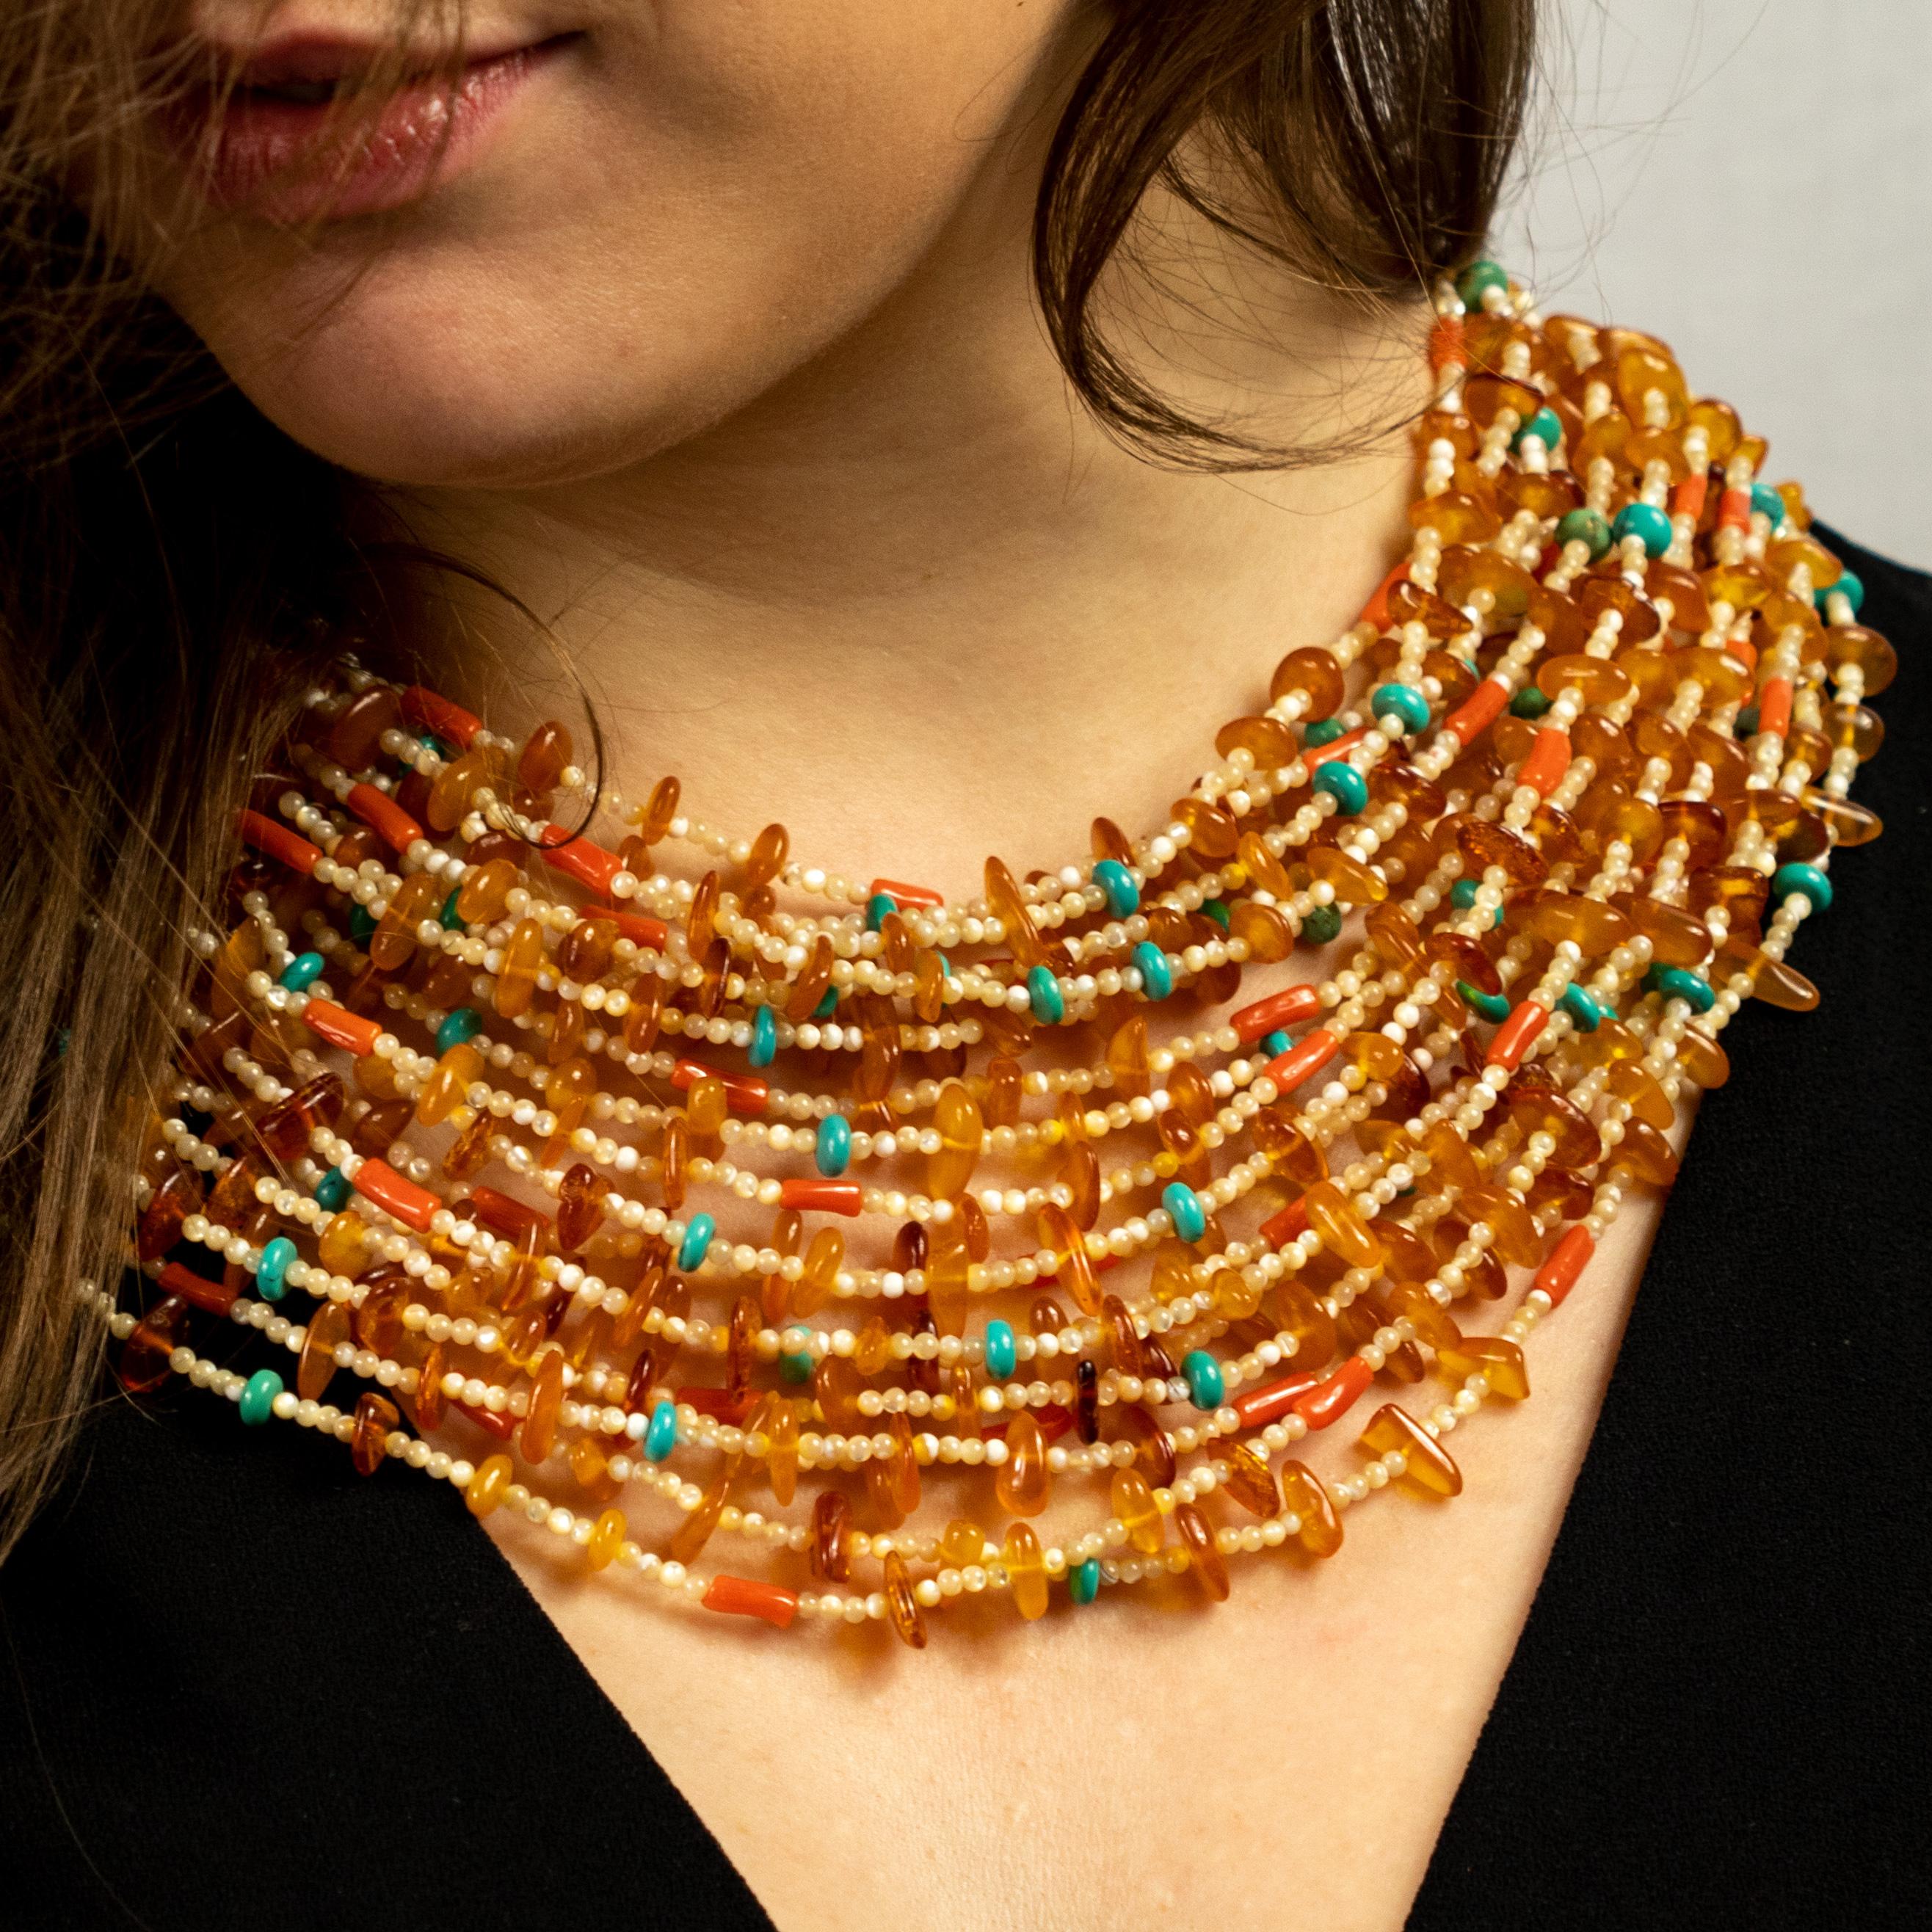 This epic statement neckace is an outstanding display of color and Italian craftsmanship where moka mother of pearl, amber, turquoise and coral melt in one-of-a-kind piece.

This necklace is inspired by the Egyptian jewelry worn by the pharaohs.